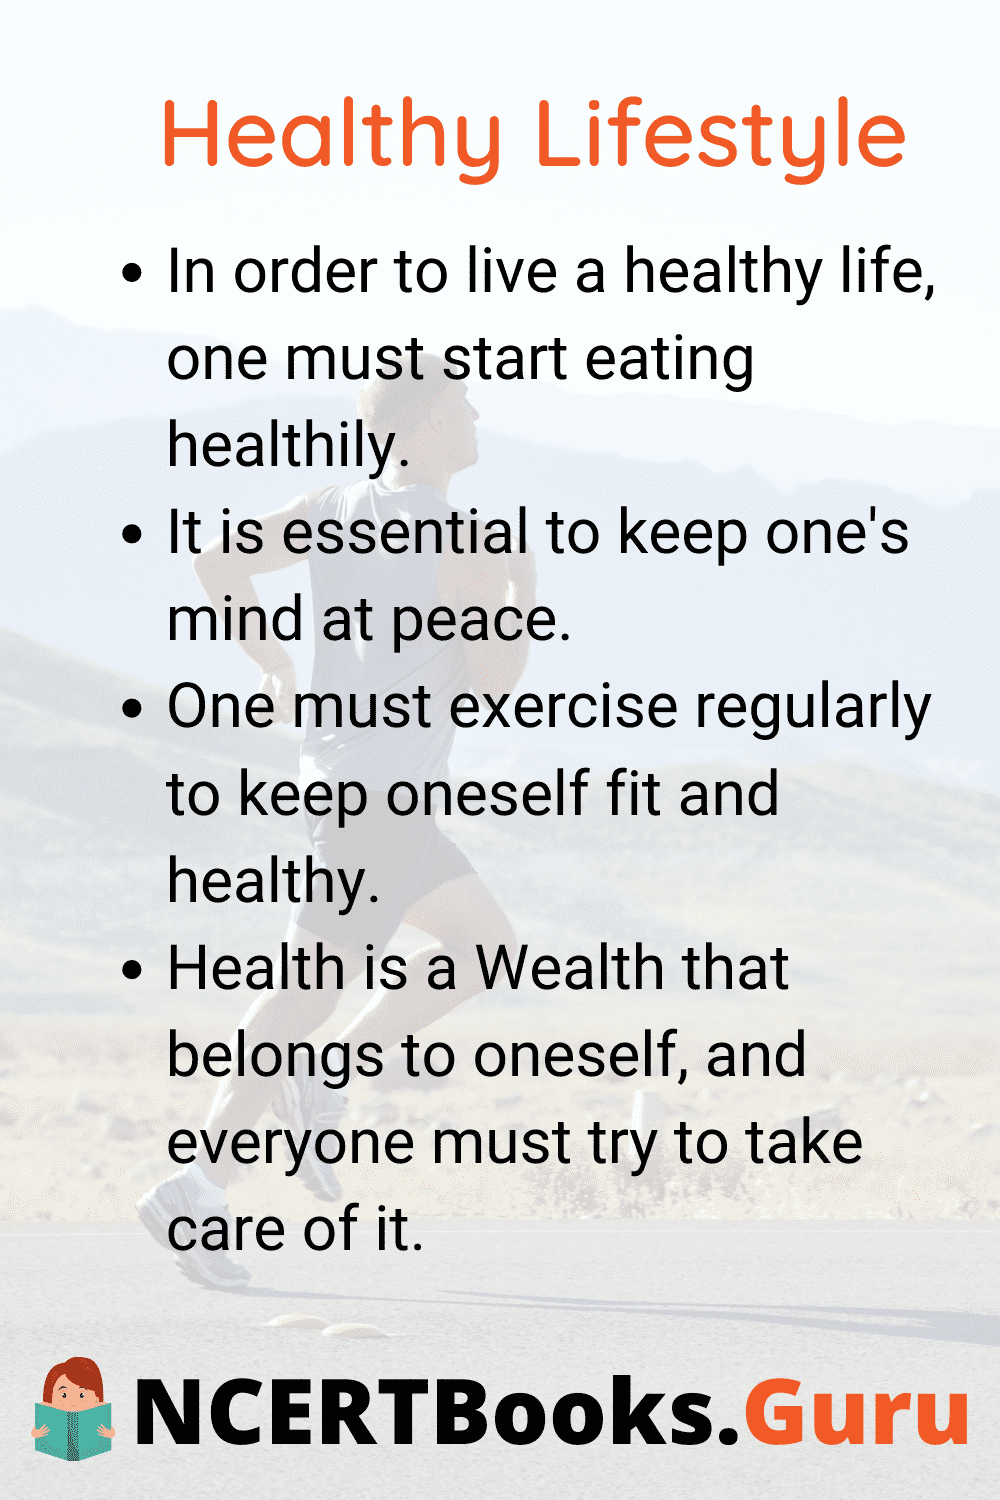 how to lead a healthy lifestyle speech